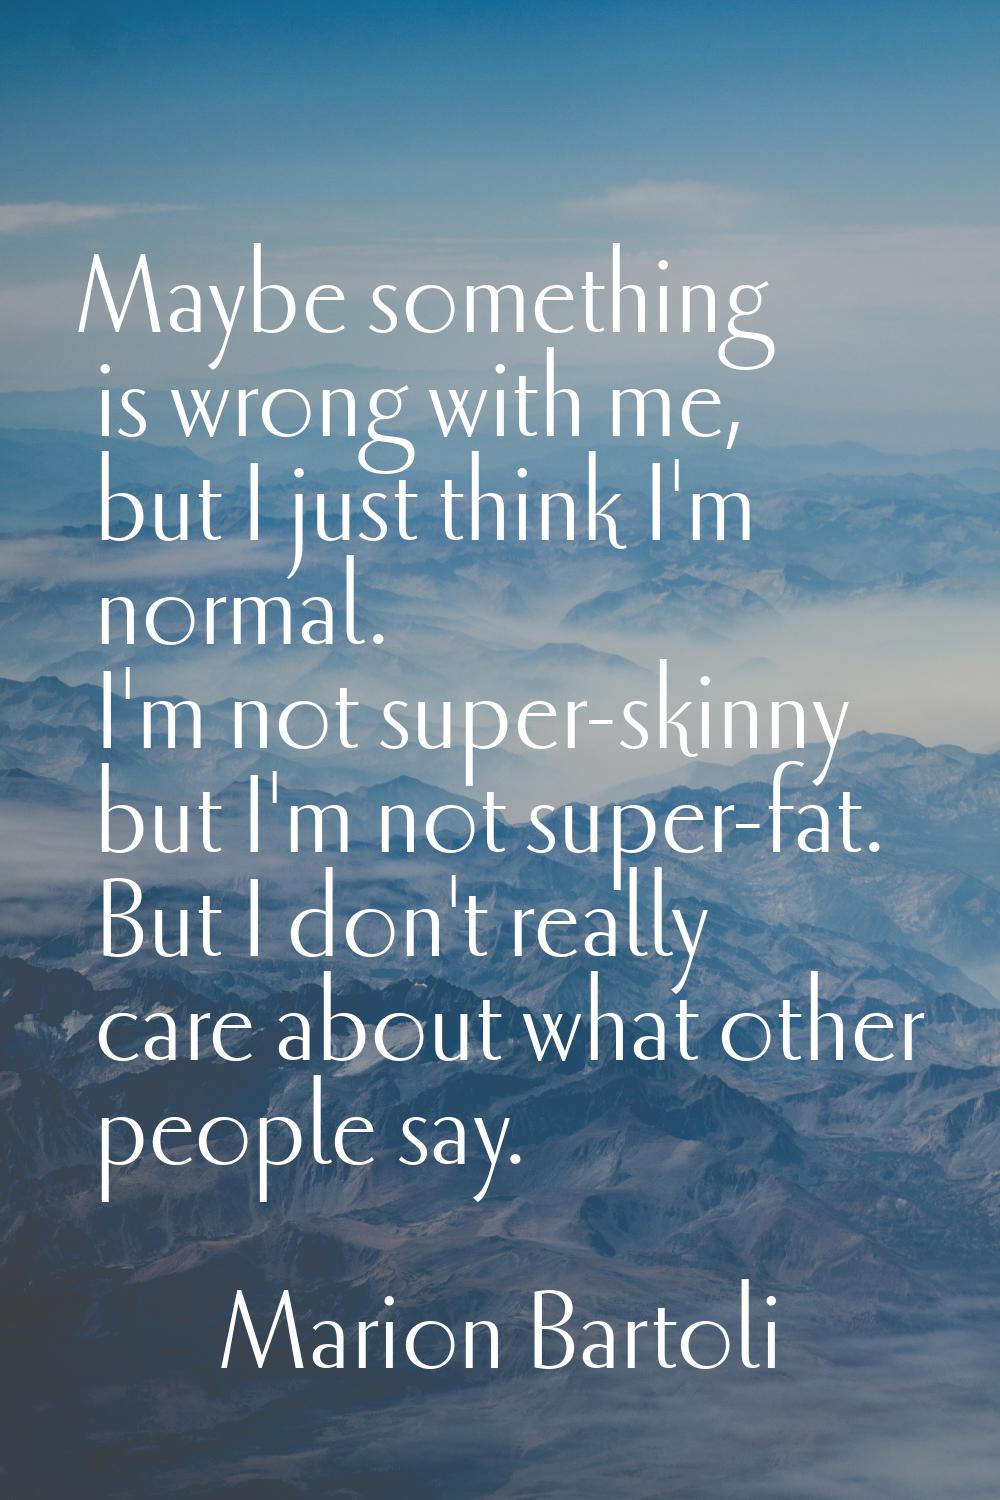 Maybe something is wrong with me, but I just think I'm normal. I'm not super-skinny but I'm not sup